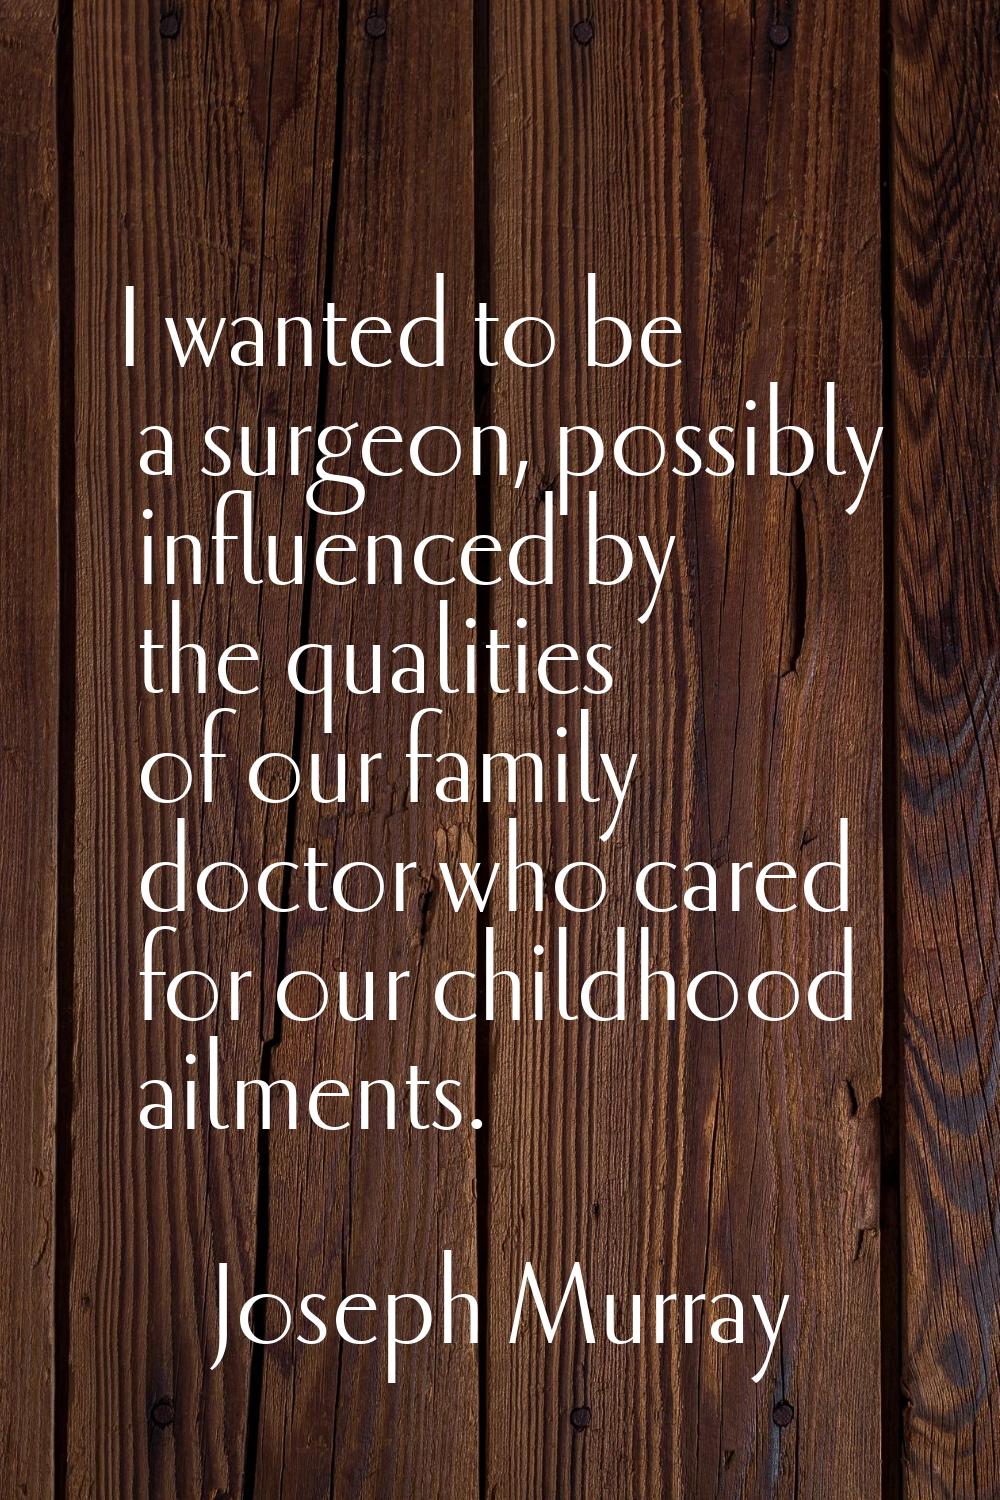 I wanted to be a surgeon, possibly influenced by the qualities of our family doctor who cared for o